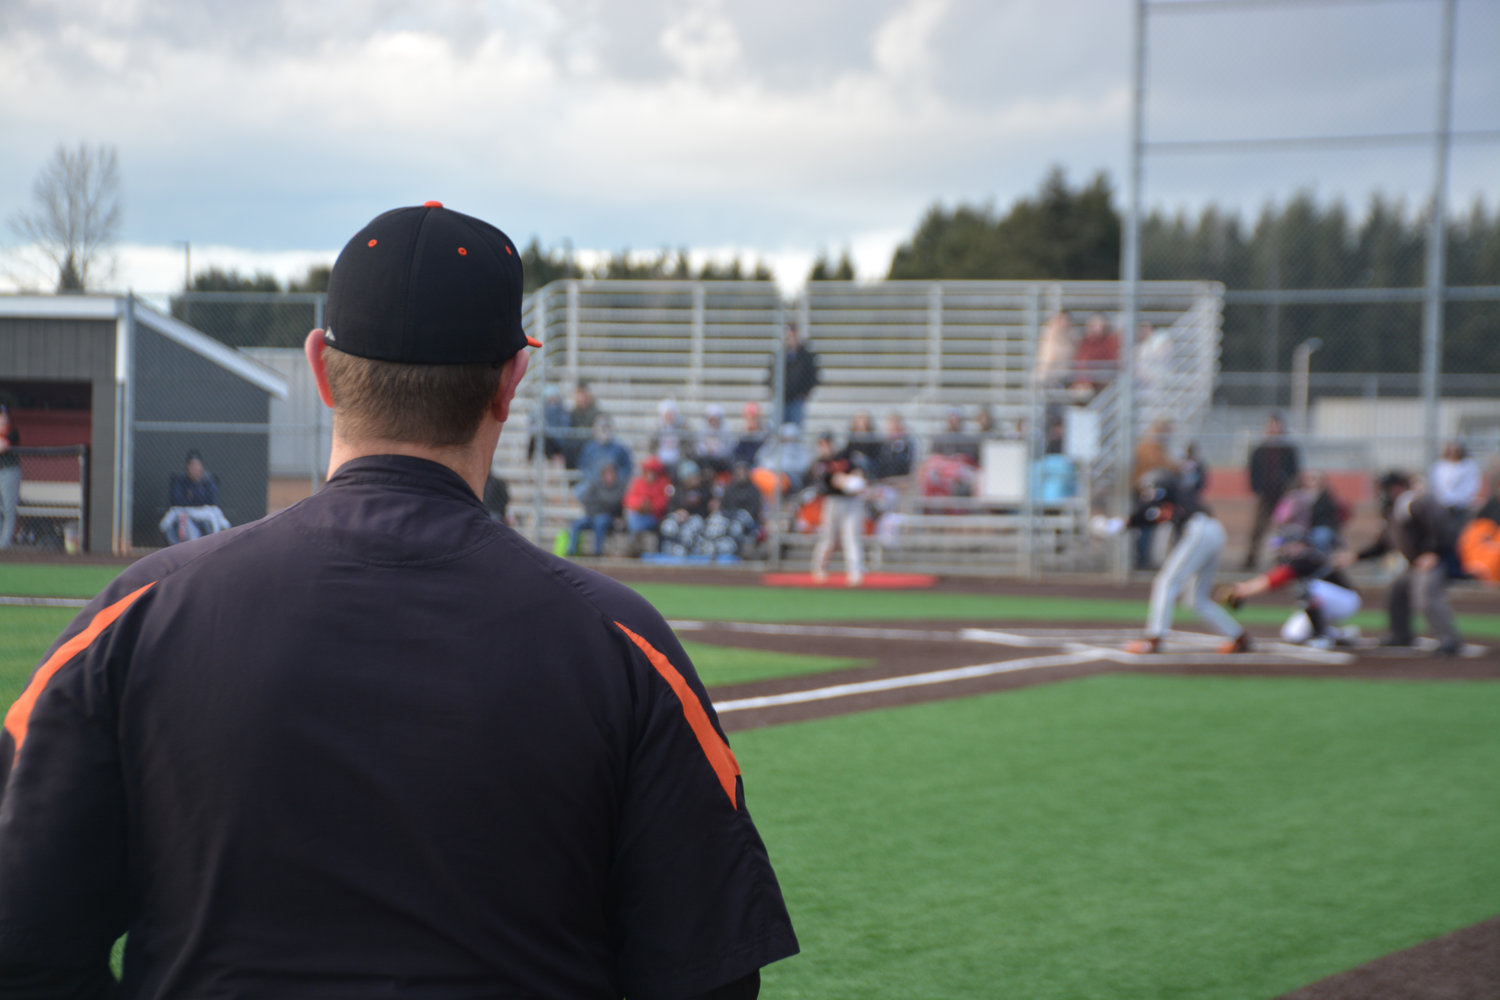 Rainier Head Coach Mark Mounts watches his team during a game against Yelm on Friday, March 10.